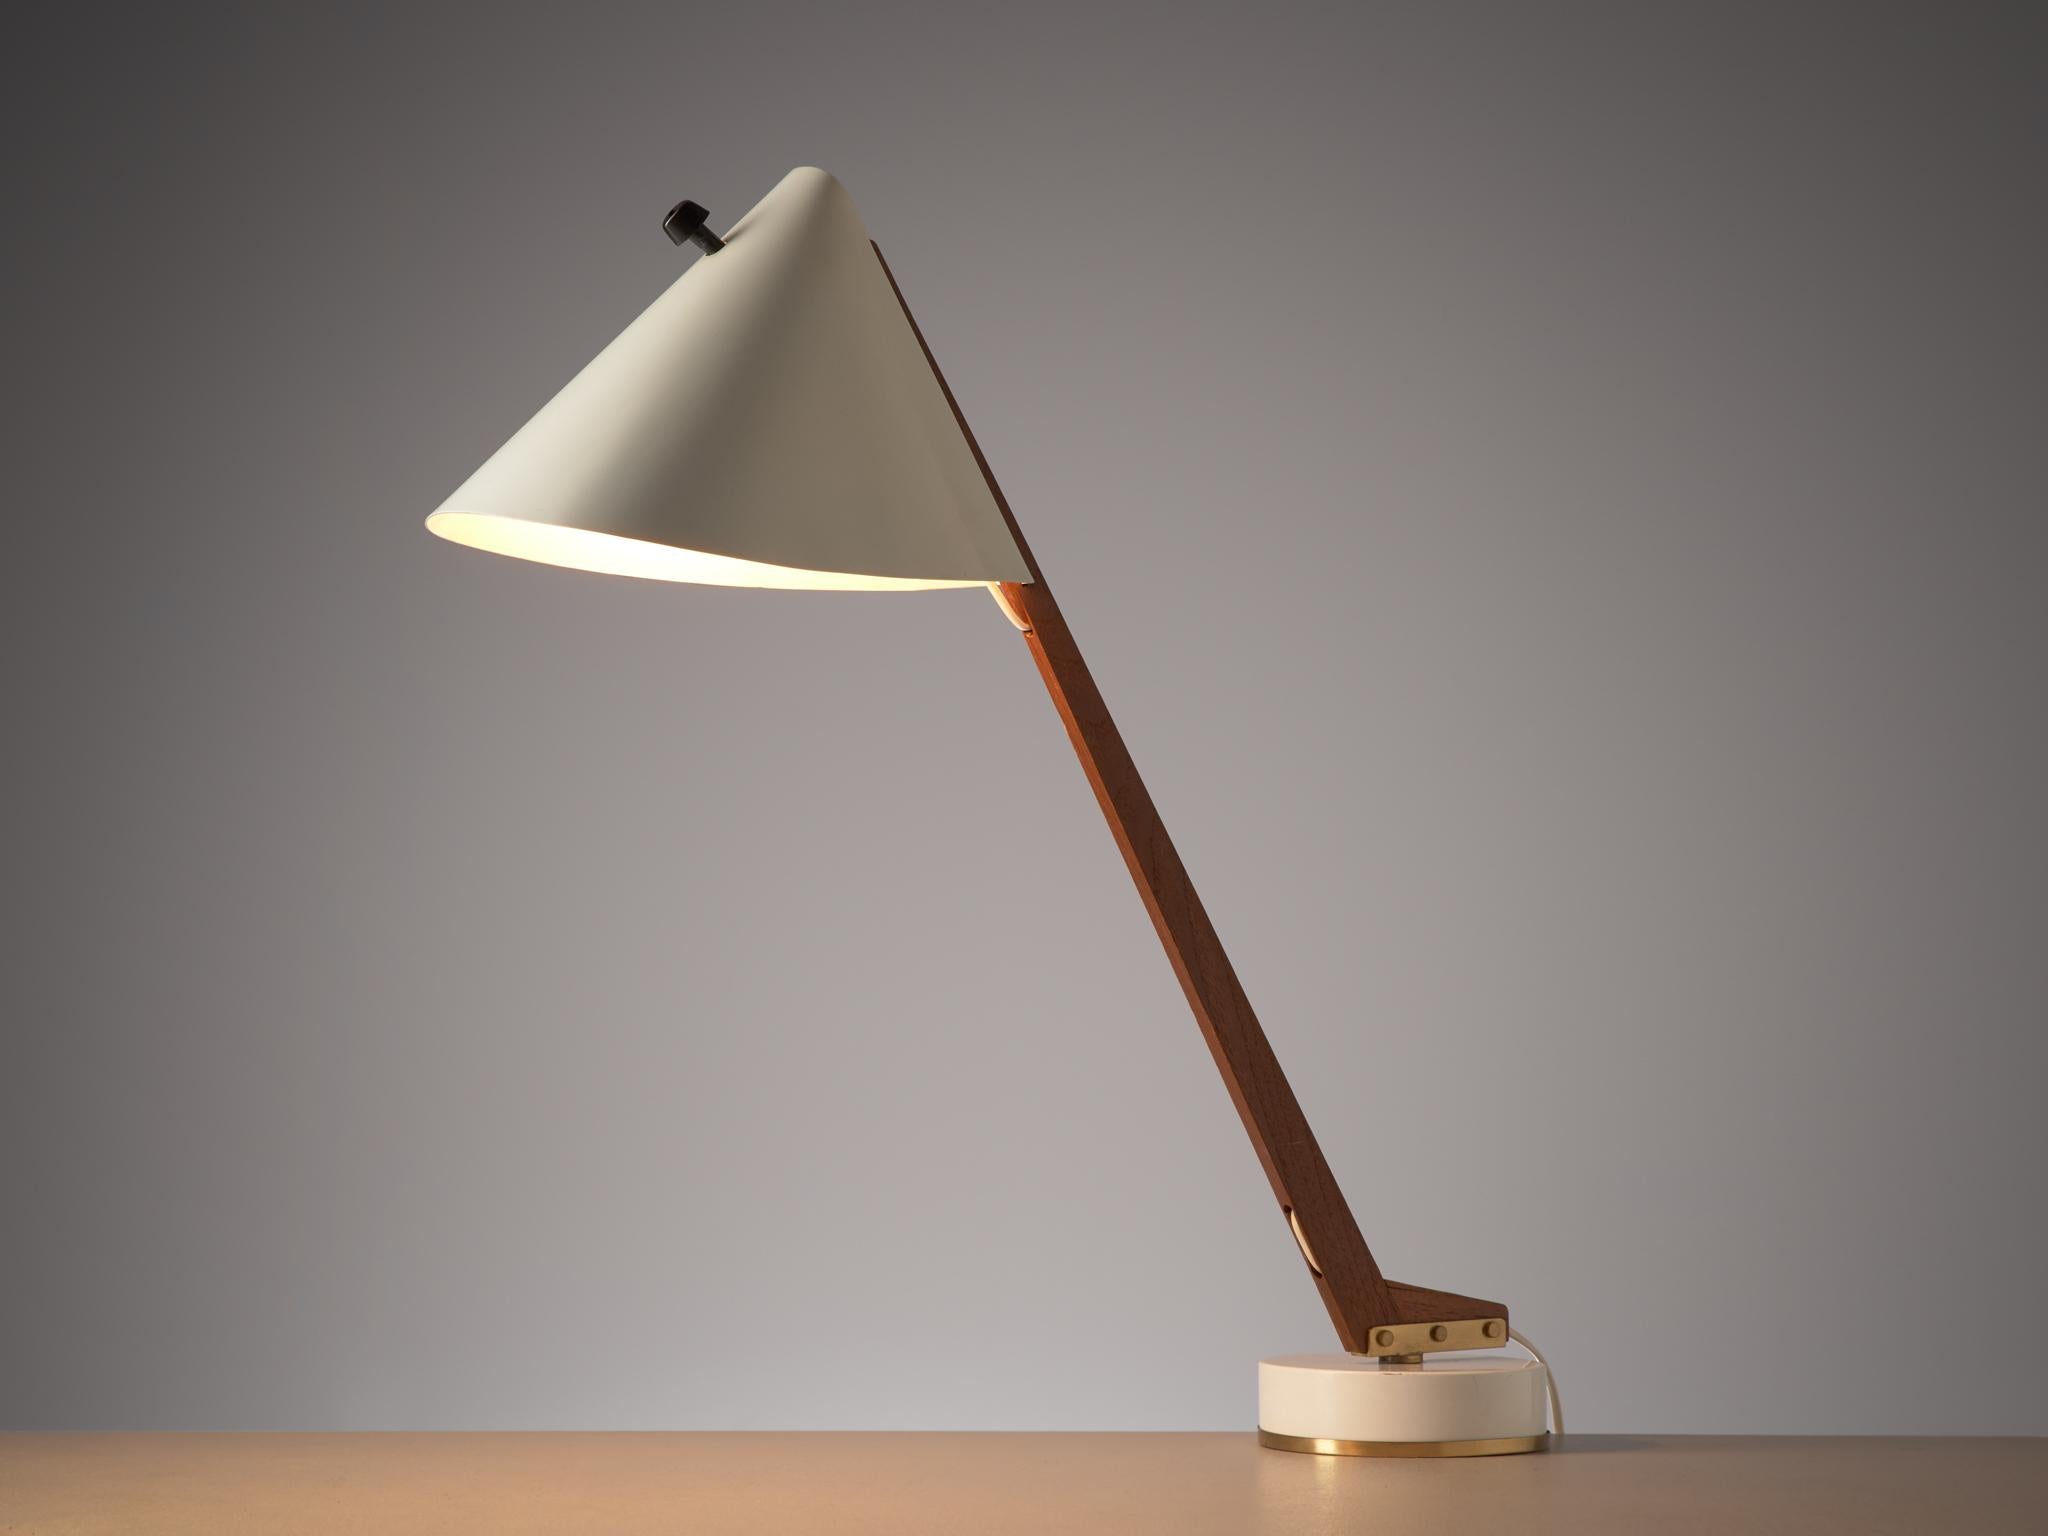 Hans Agne Jakobsson for Markaryd, table lamp 'model B54', aluminum, brass and teak, Sweden, circa 1955

Simplistic desk light designed by the Swedish Hans Agne Jakobsson, featuring a teak, tapered base. A folded, white lacquered alumin shade is held